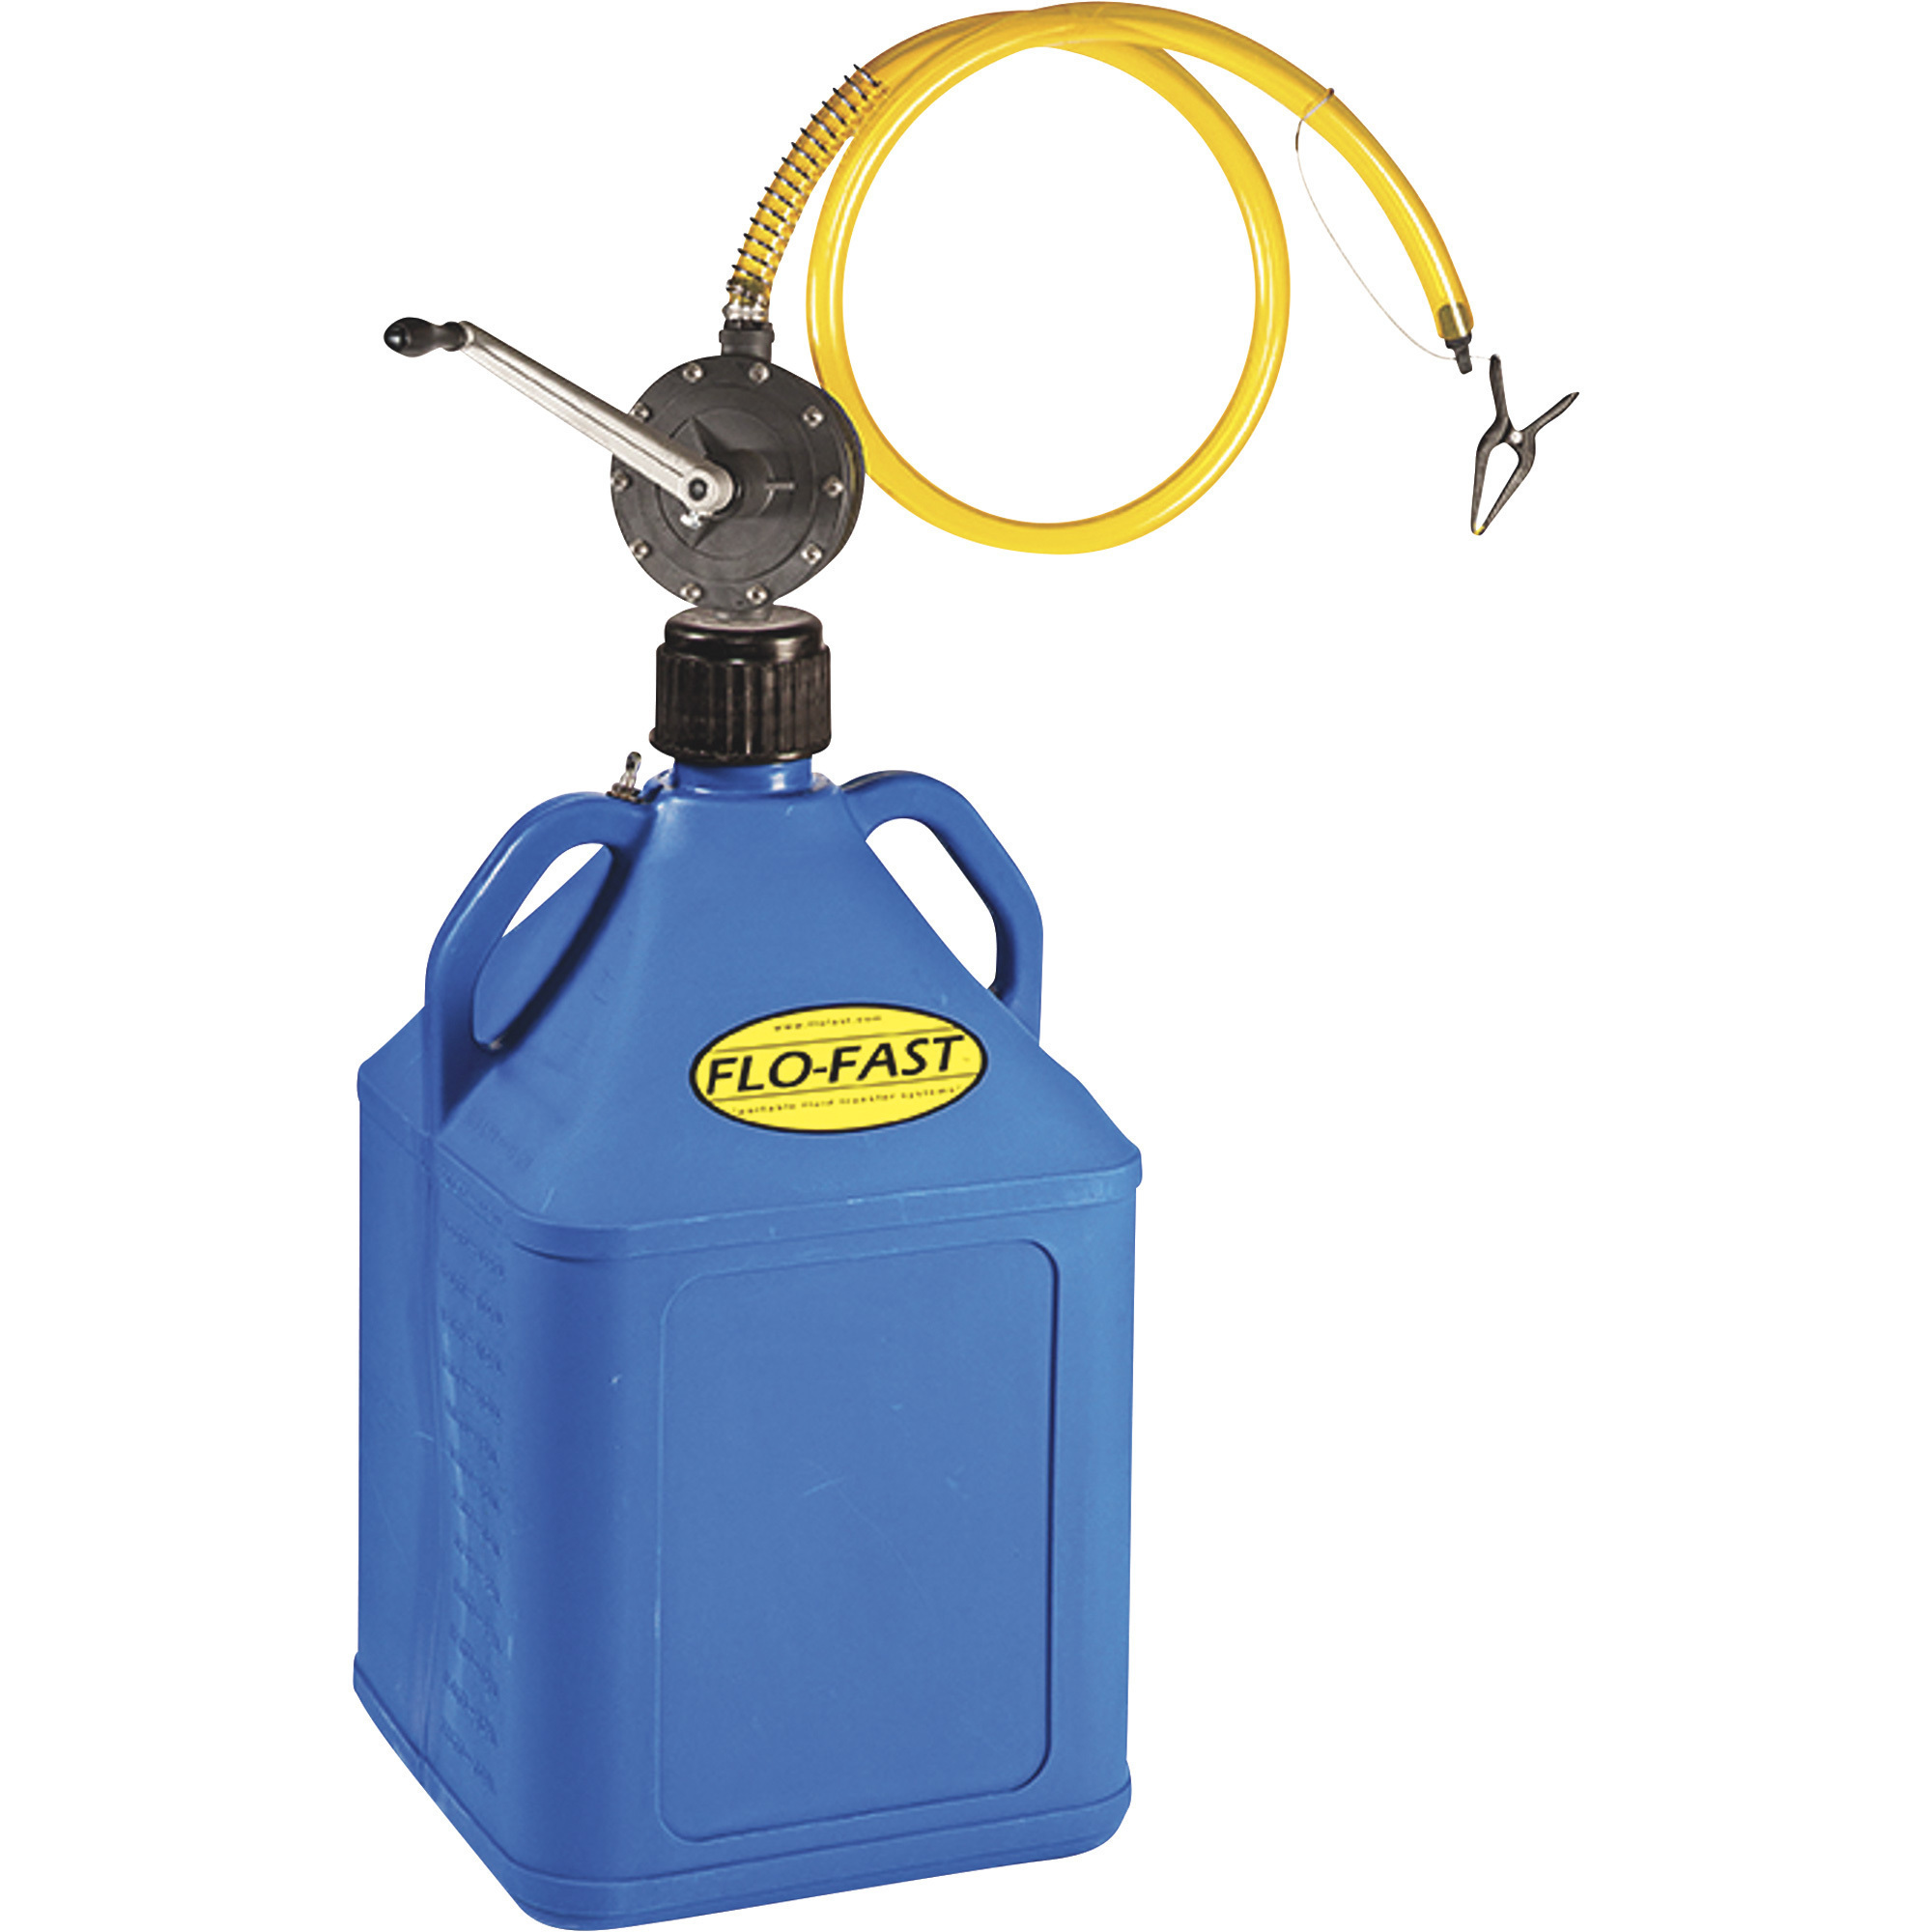 FLO-FAST Container With Pump, 15-Gallon, Blue, For Kerosene, Model 31005-B